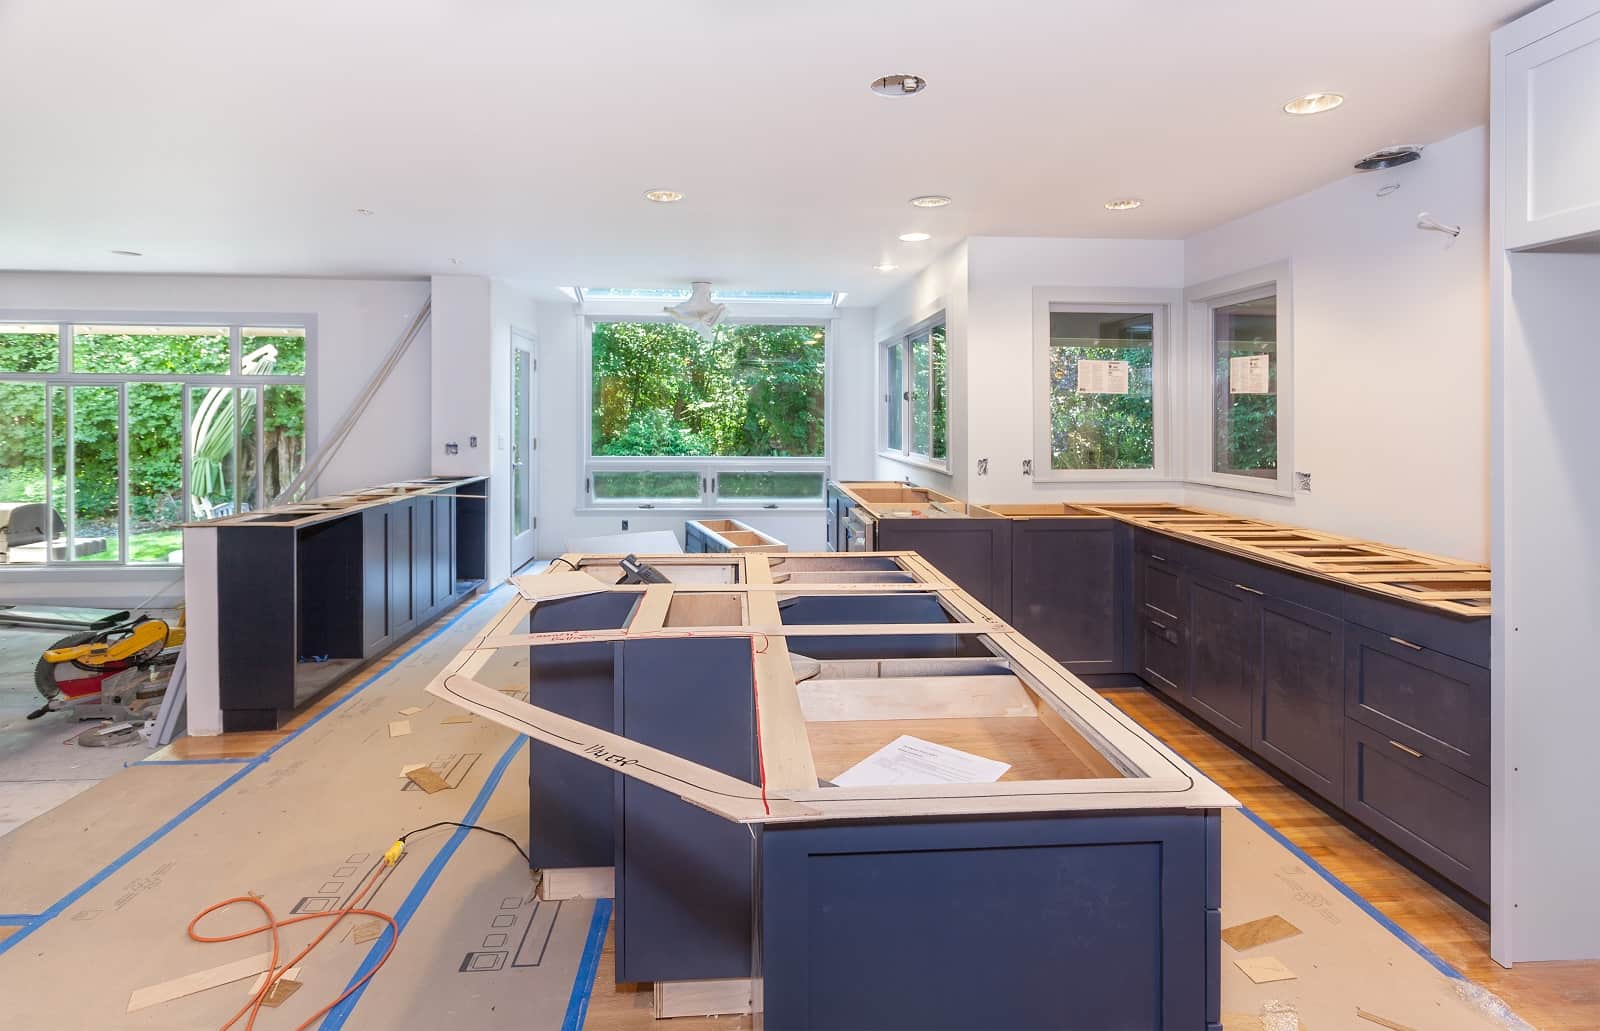 The Dos And Don'ts Of A Perfect Kitchen Remodel. A great contemporary designed space with large central island before installing the countertop